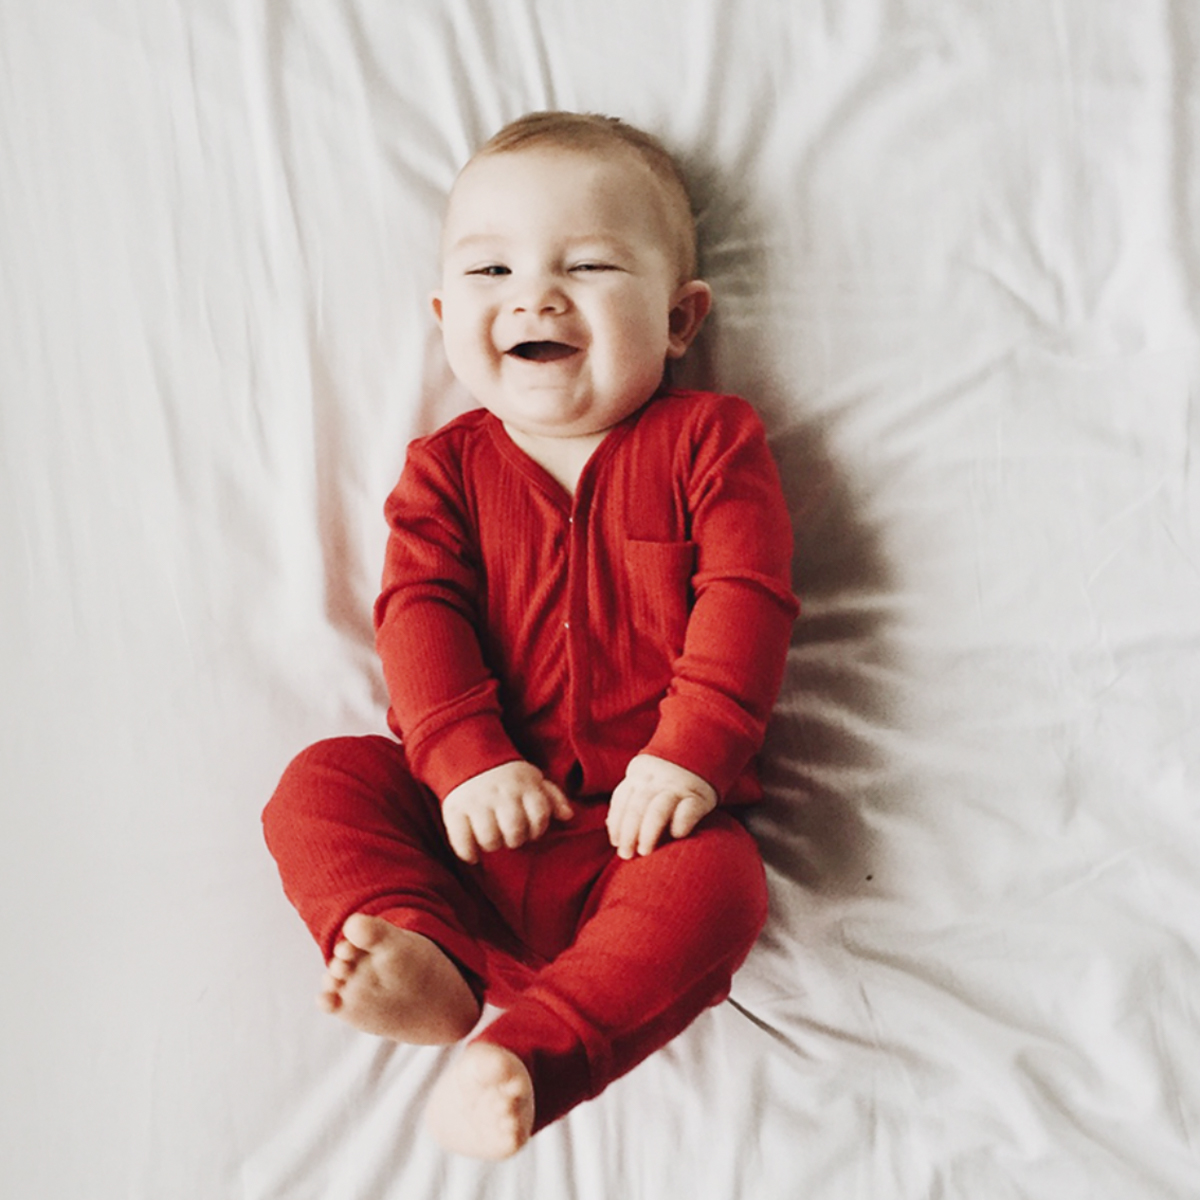 Baby in onesie laying on bed and laughing